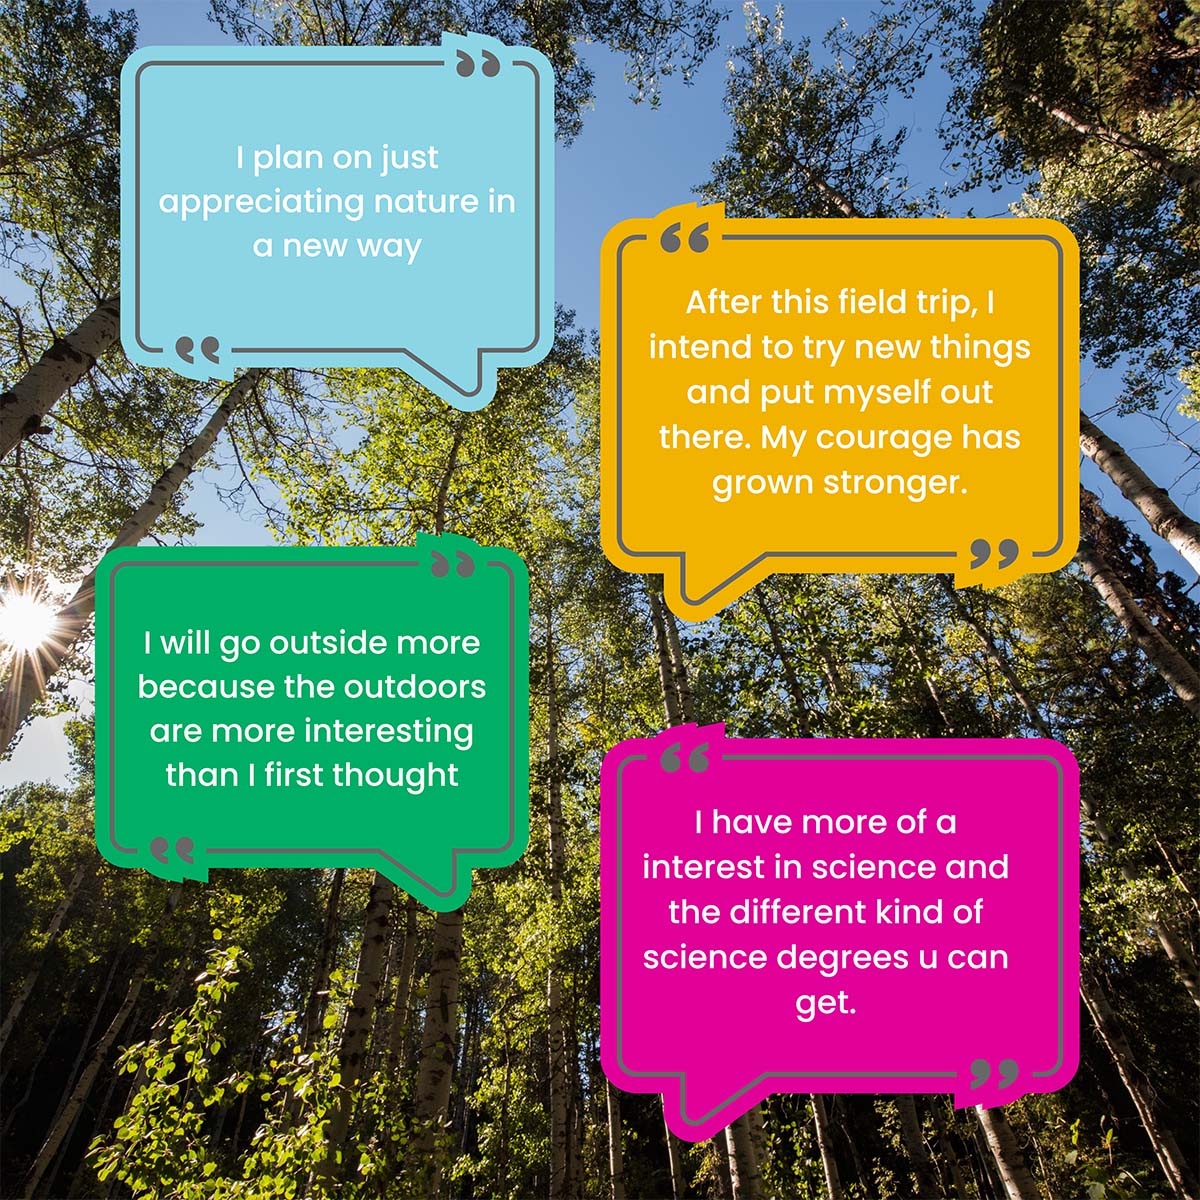 Quotes of children enjoying the outdoors. "I plan on just appreciating nature in a new way."